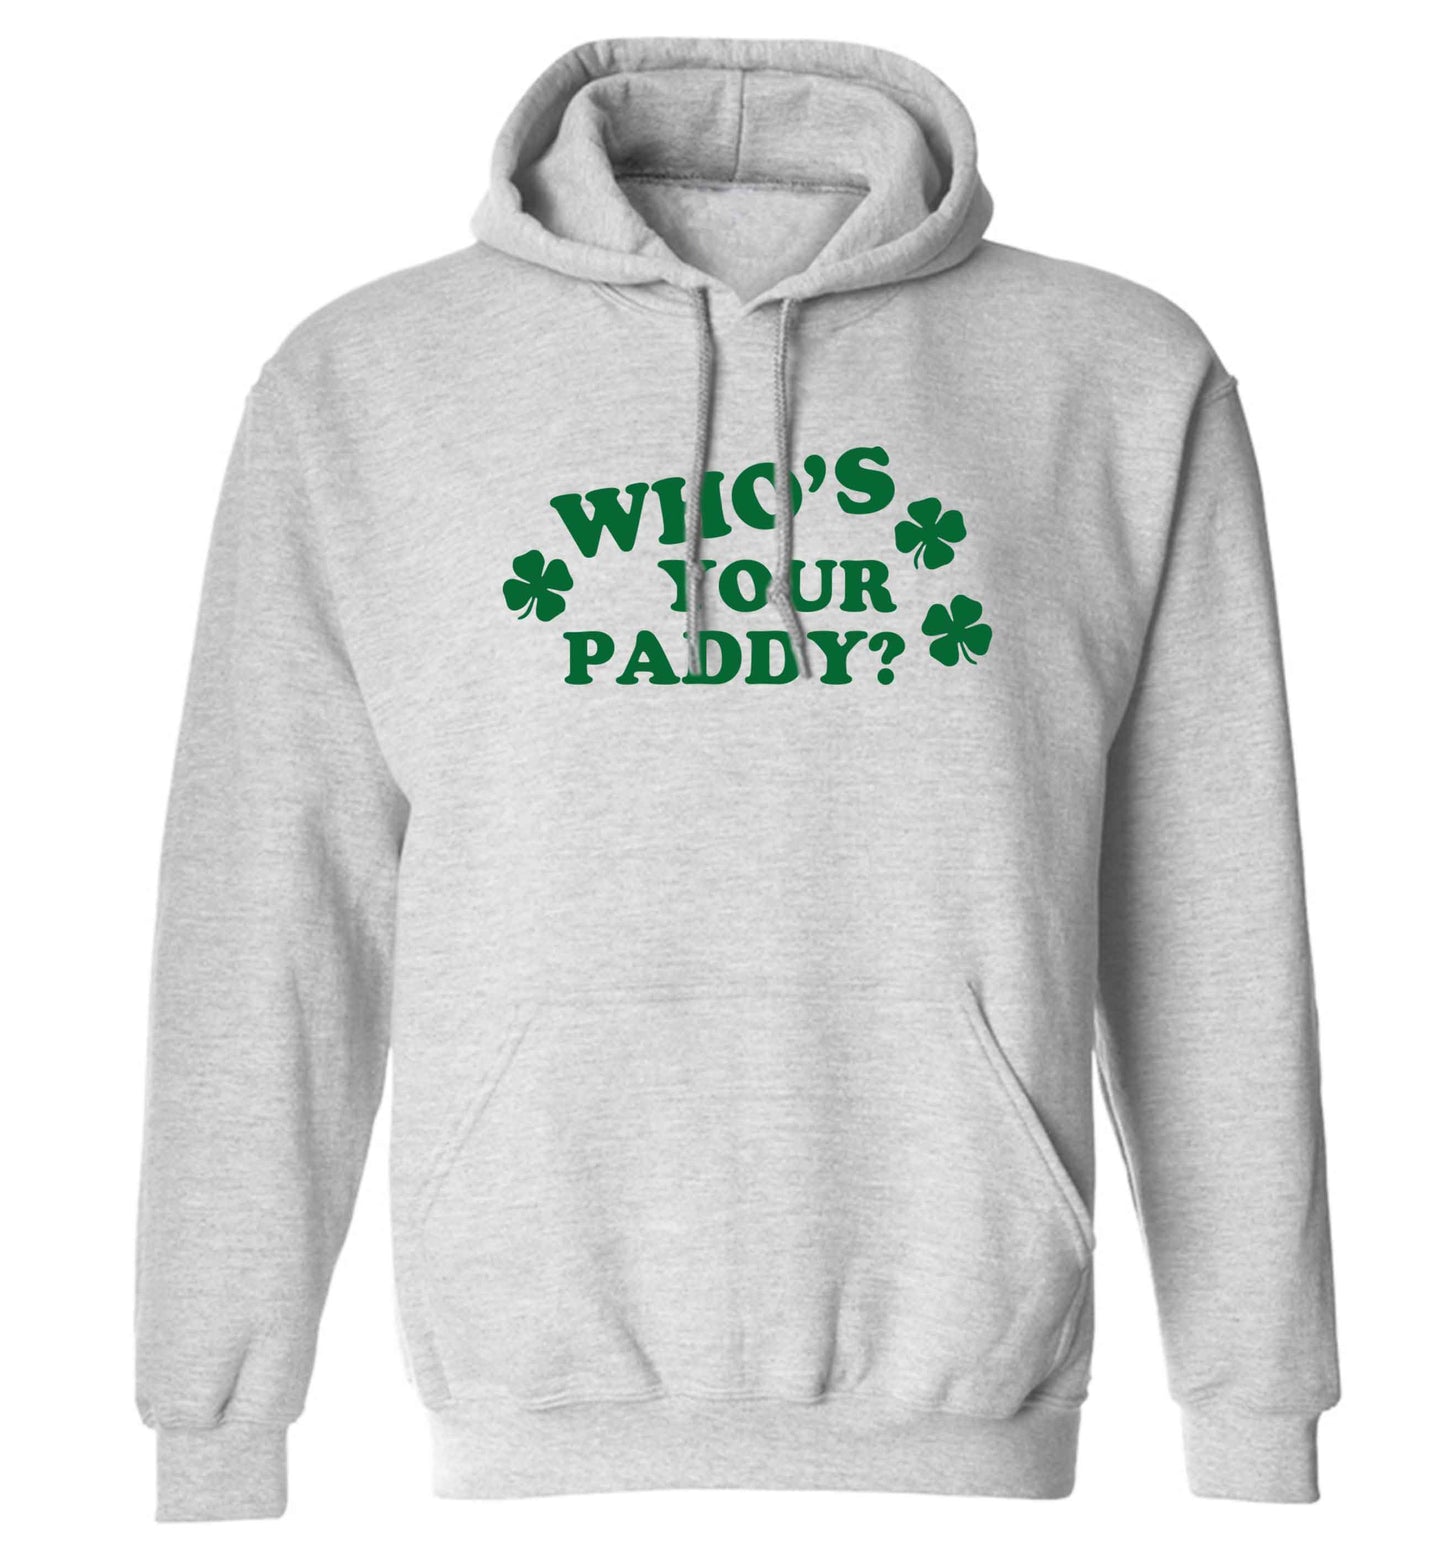 Who's your paddy? adults unisex grey hoodie 2XL